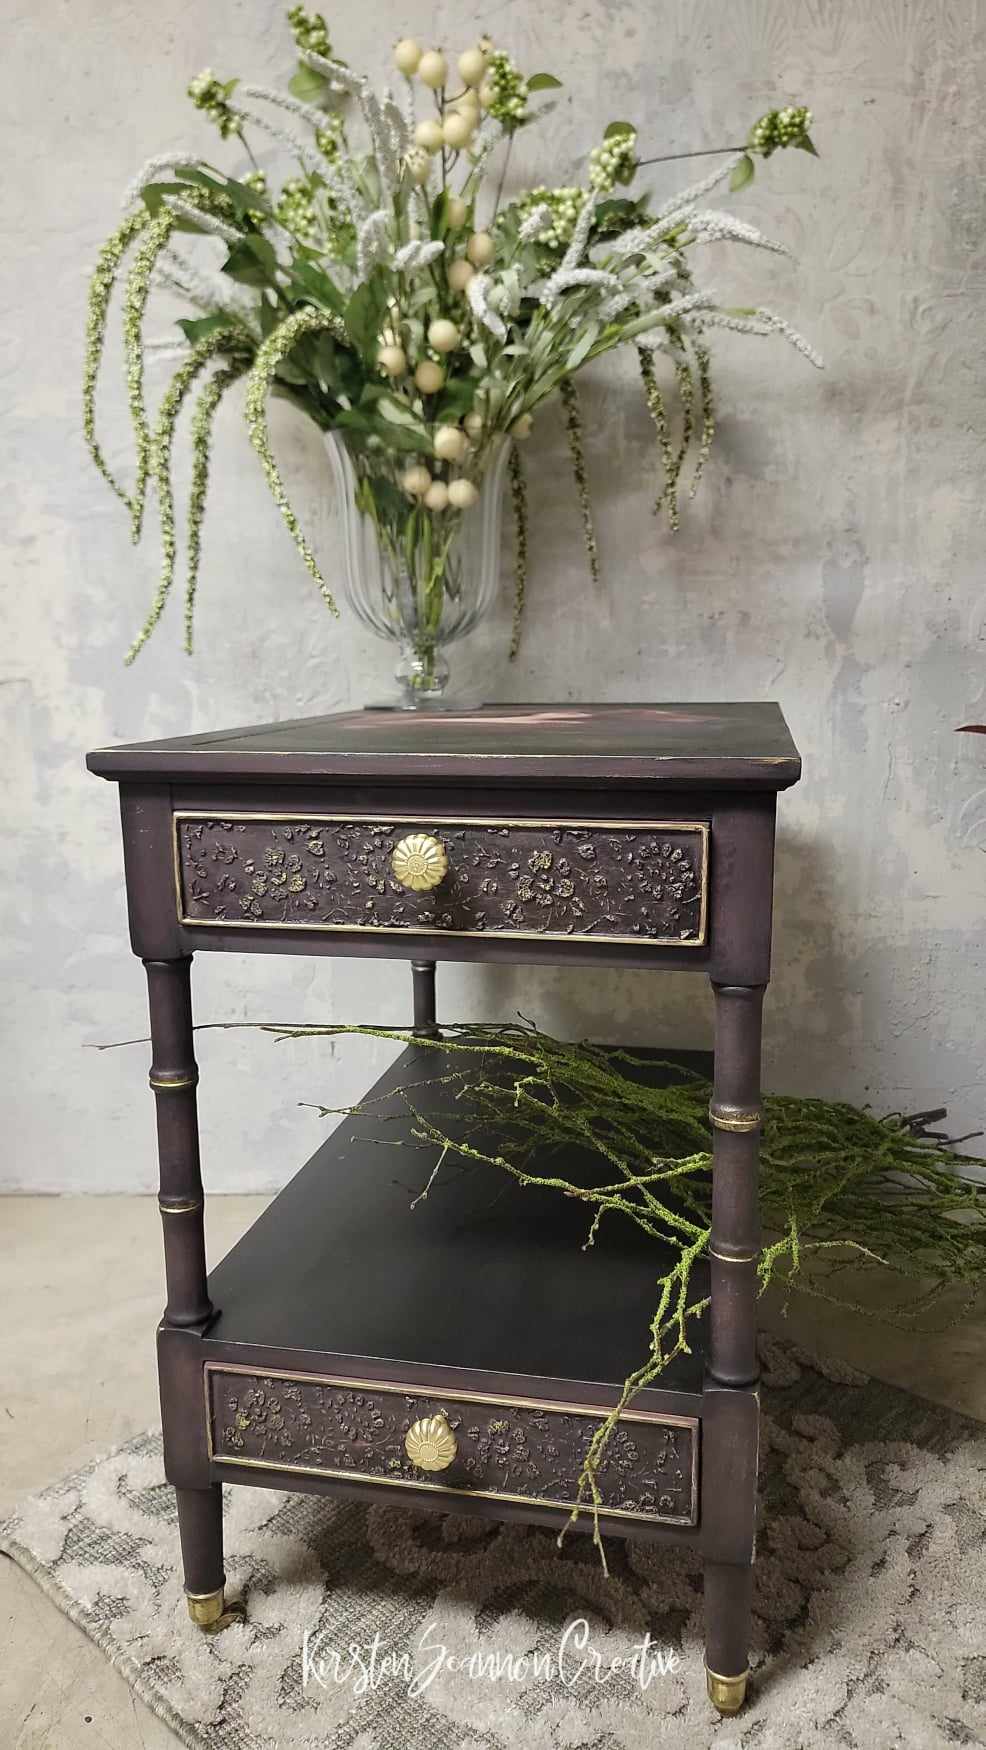 Equestrian Theme Vintage Hekman Side Table on Casters